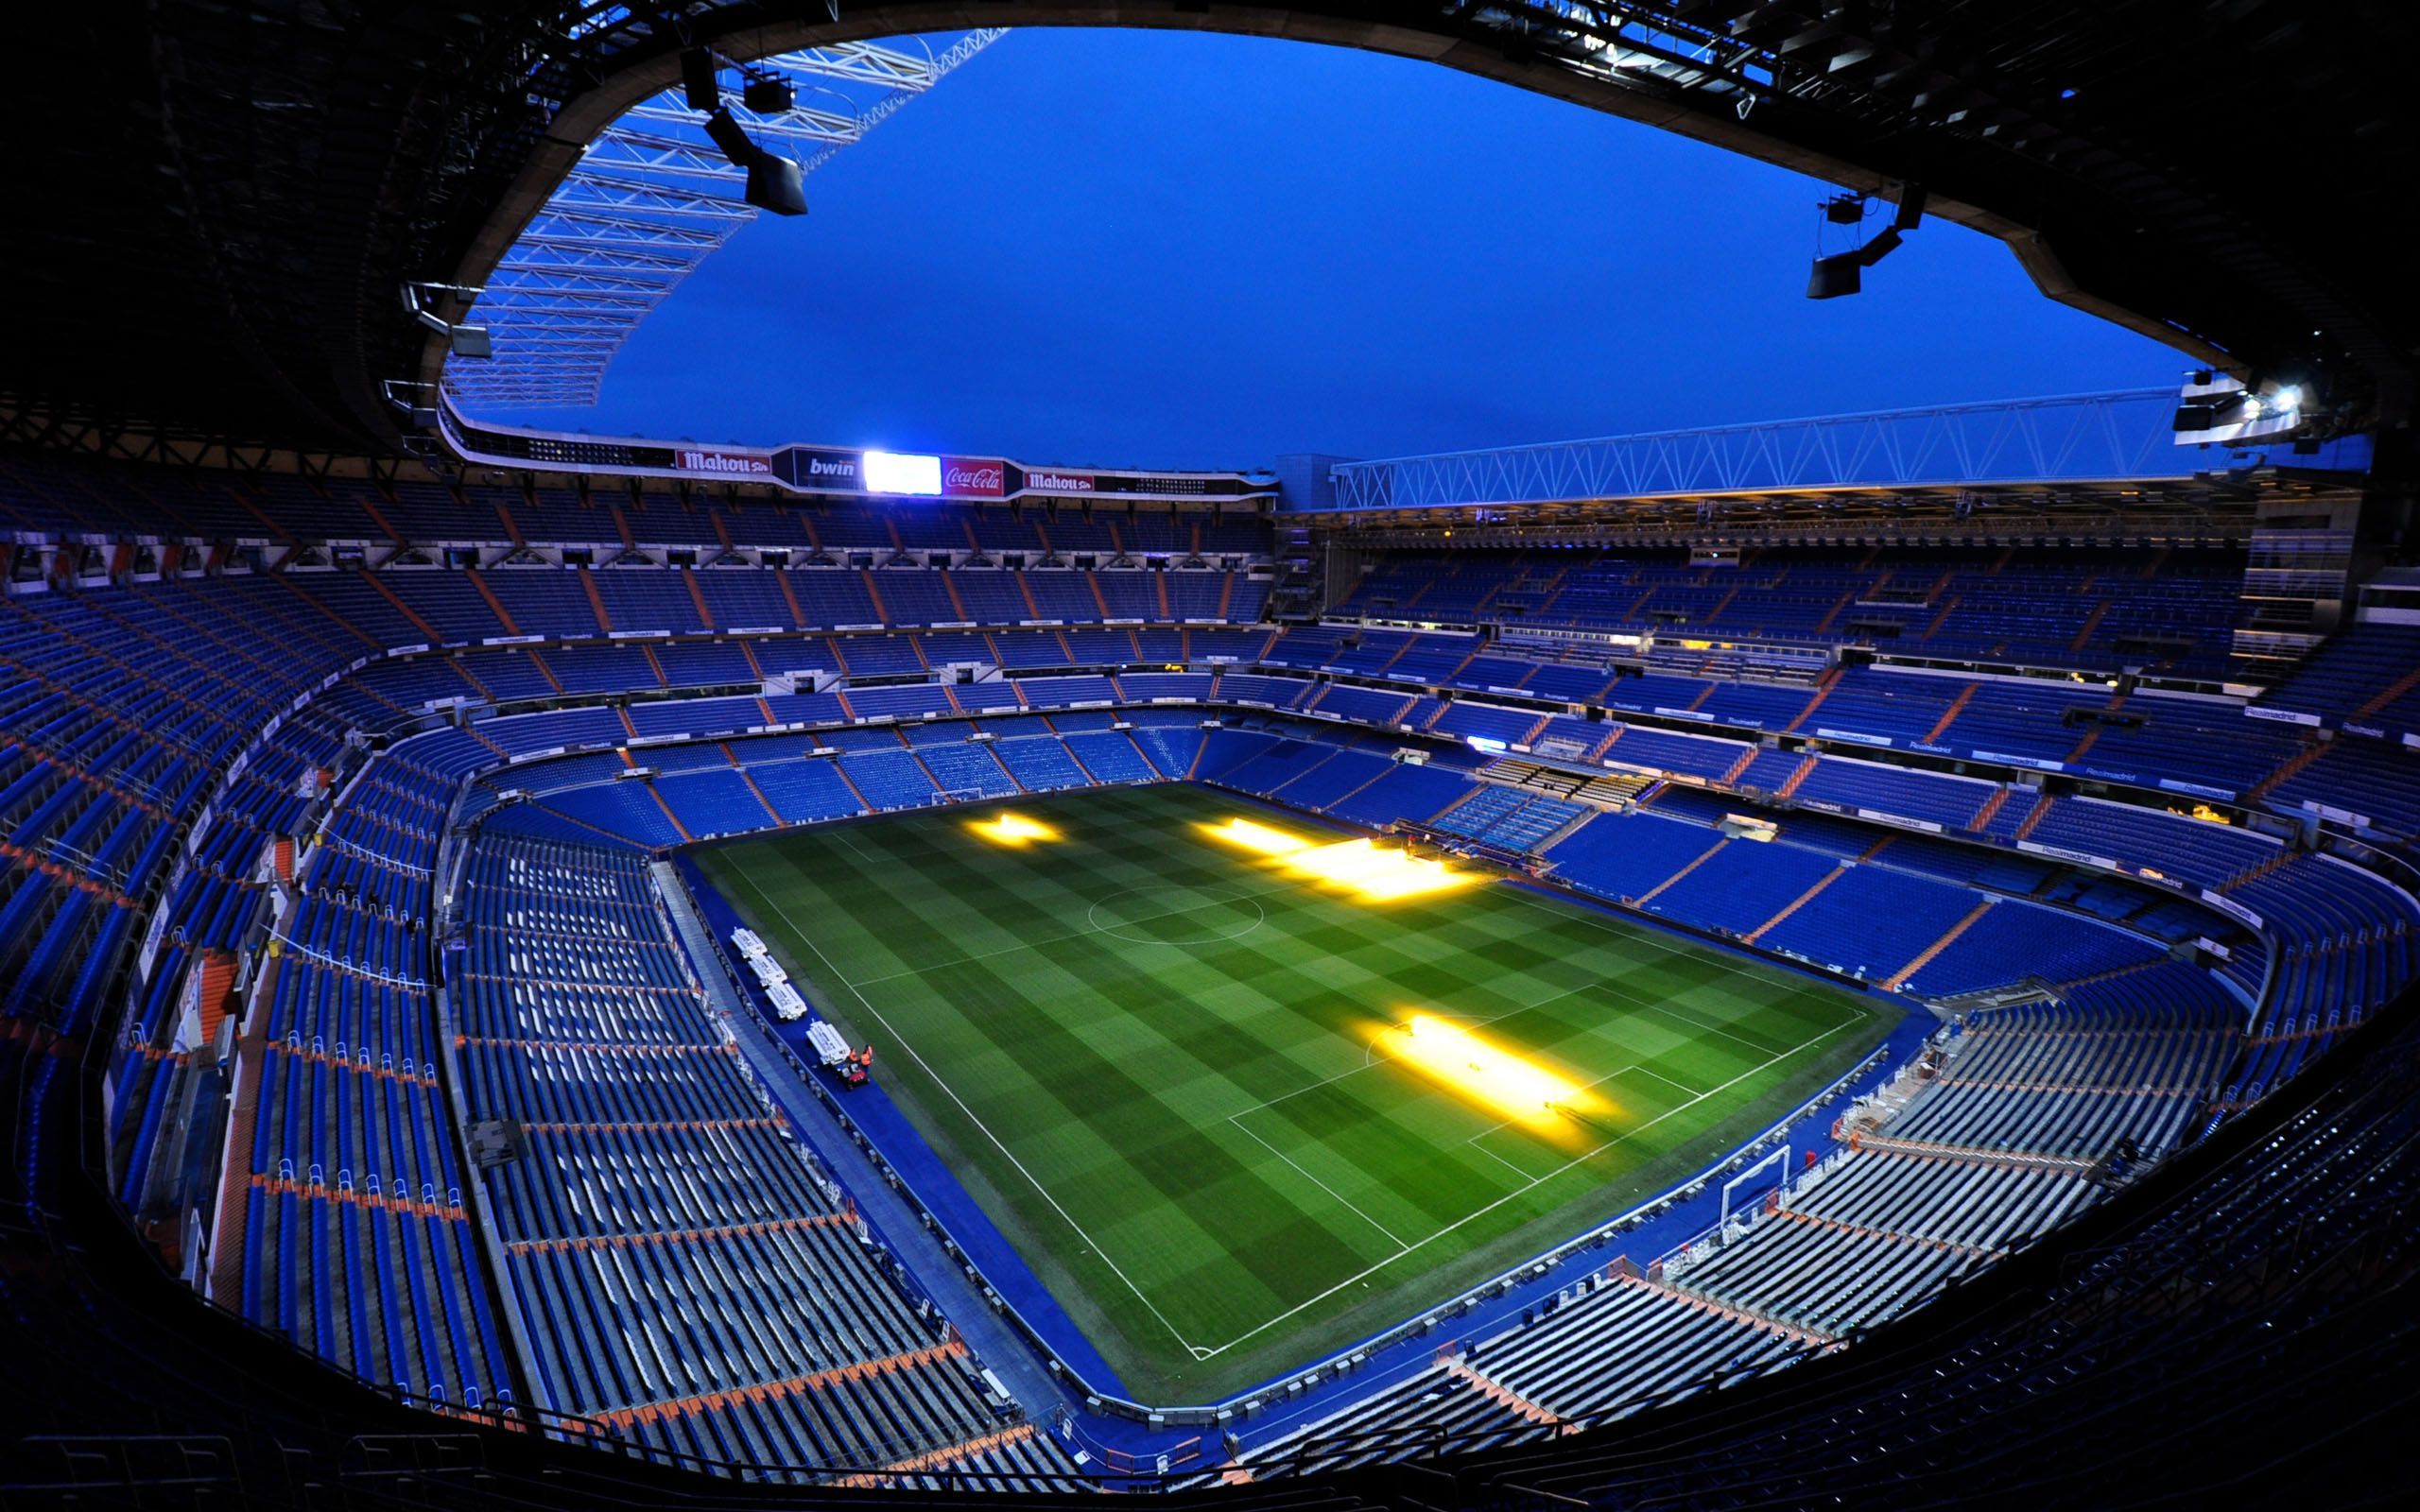 Real Madrid Stadium wallpapers hd | Wallpapers, Backgrounds ...